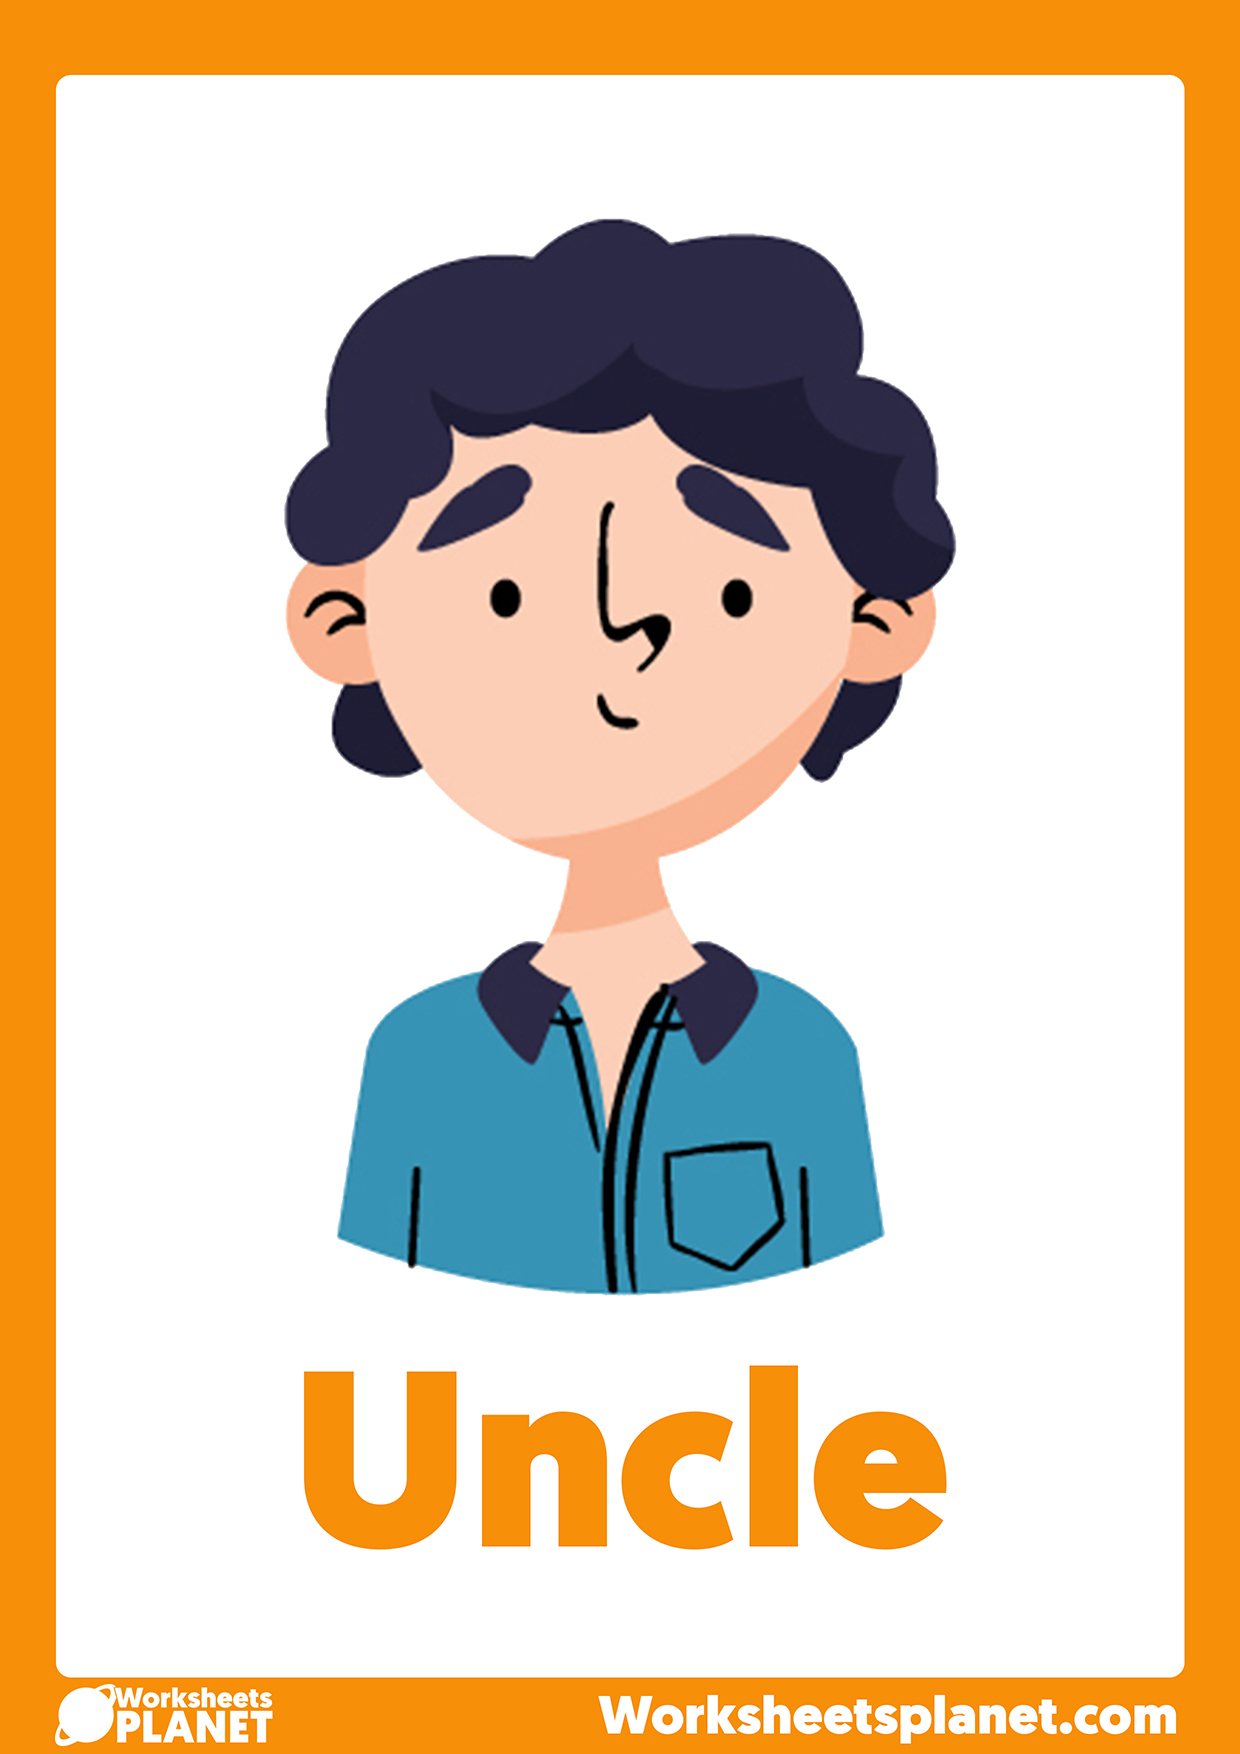 Their uncle